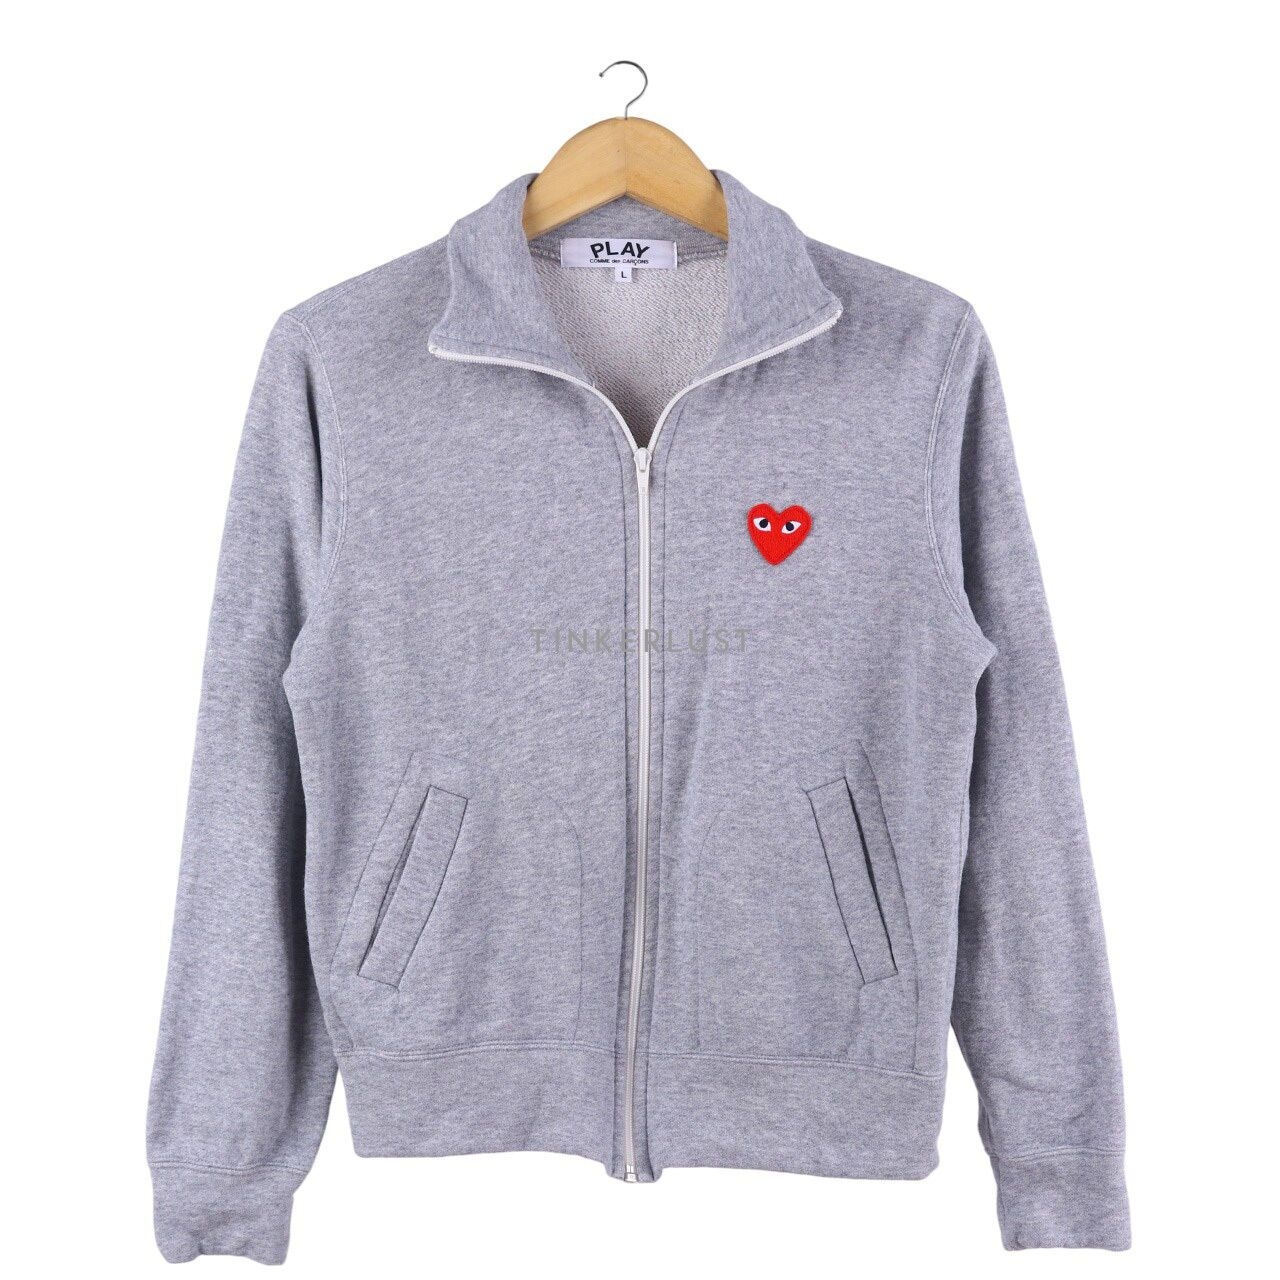 Play by Comme des Garcons Grey Fullzip Multiheart Jacket